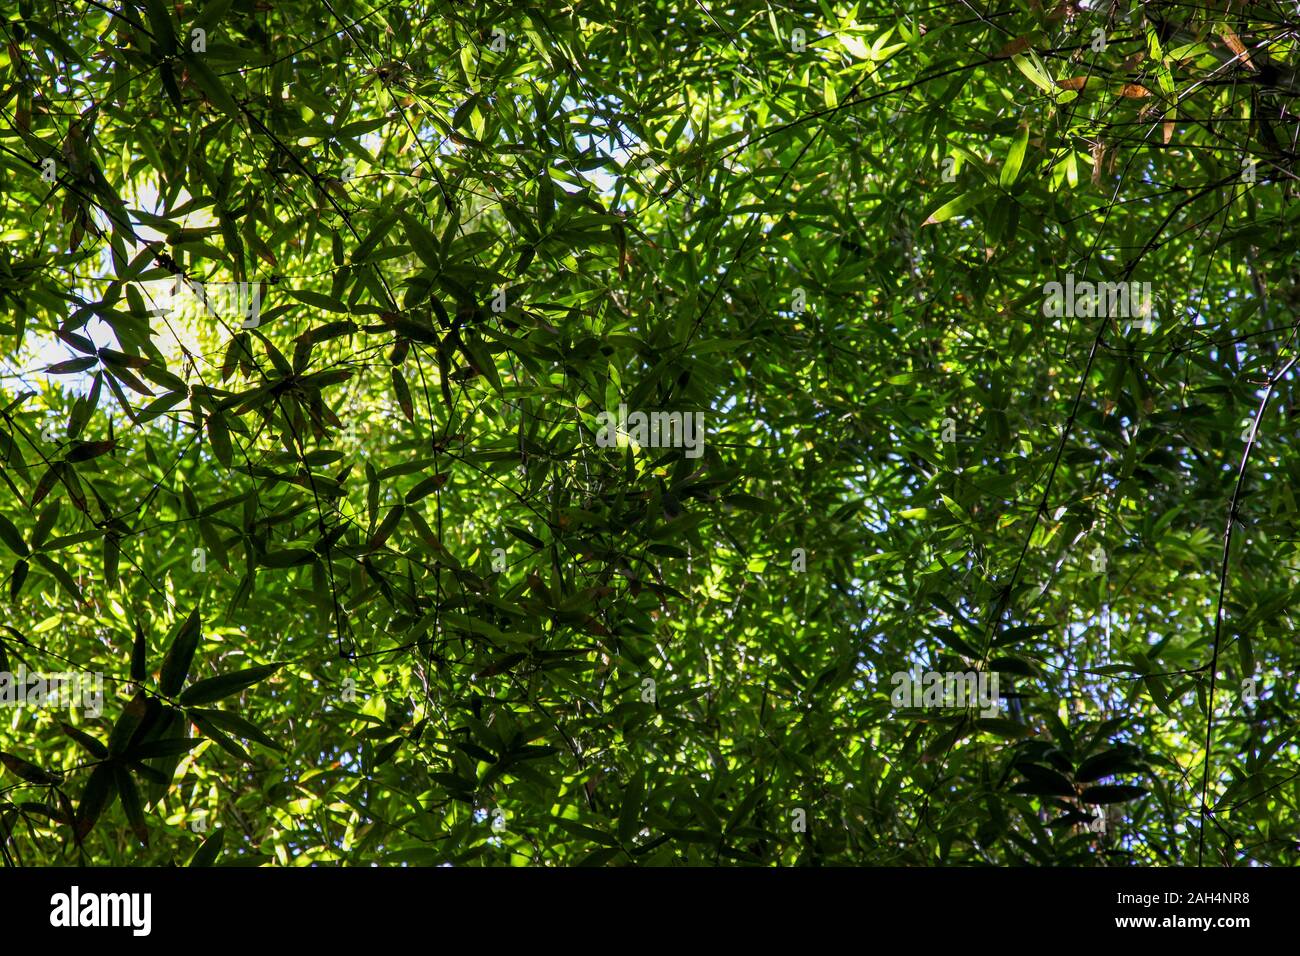 A canopy of greenery Stock Photo